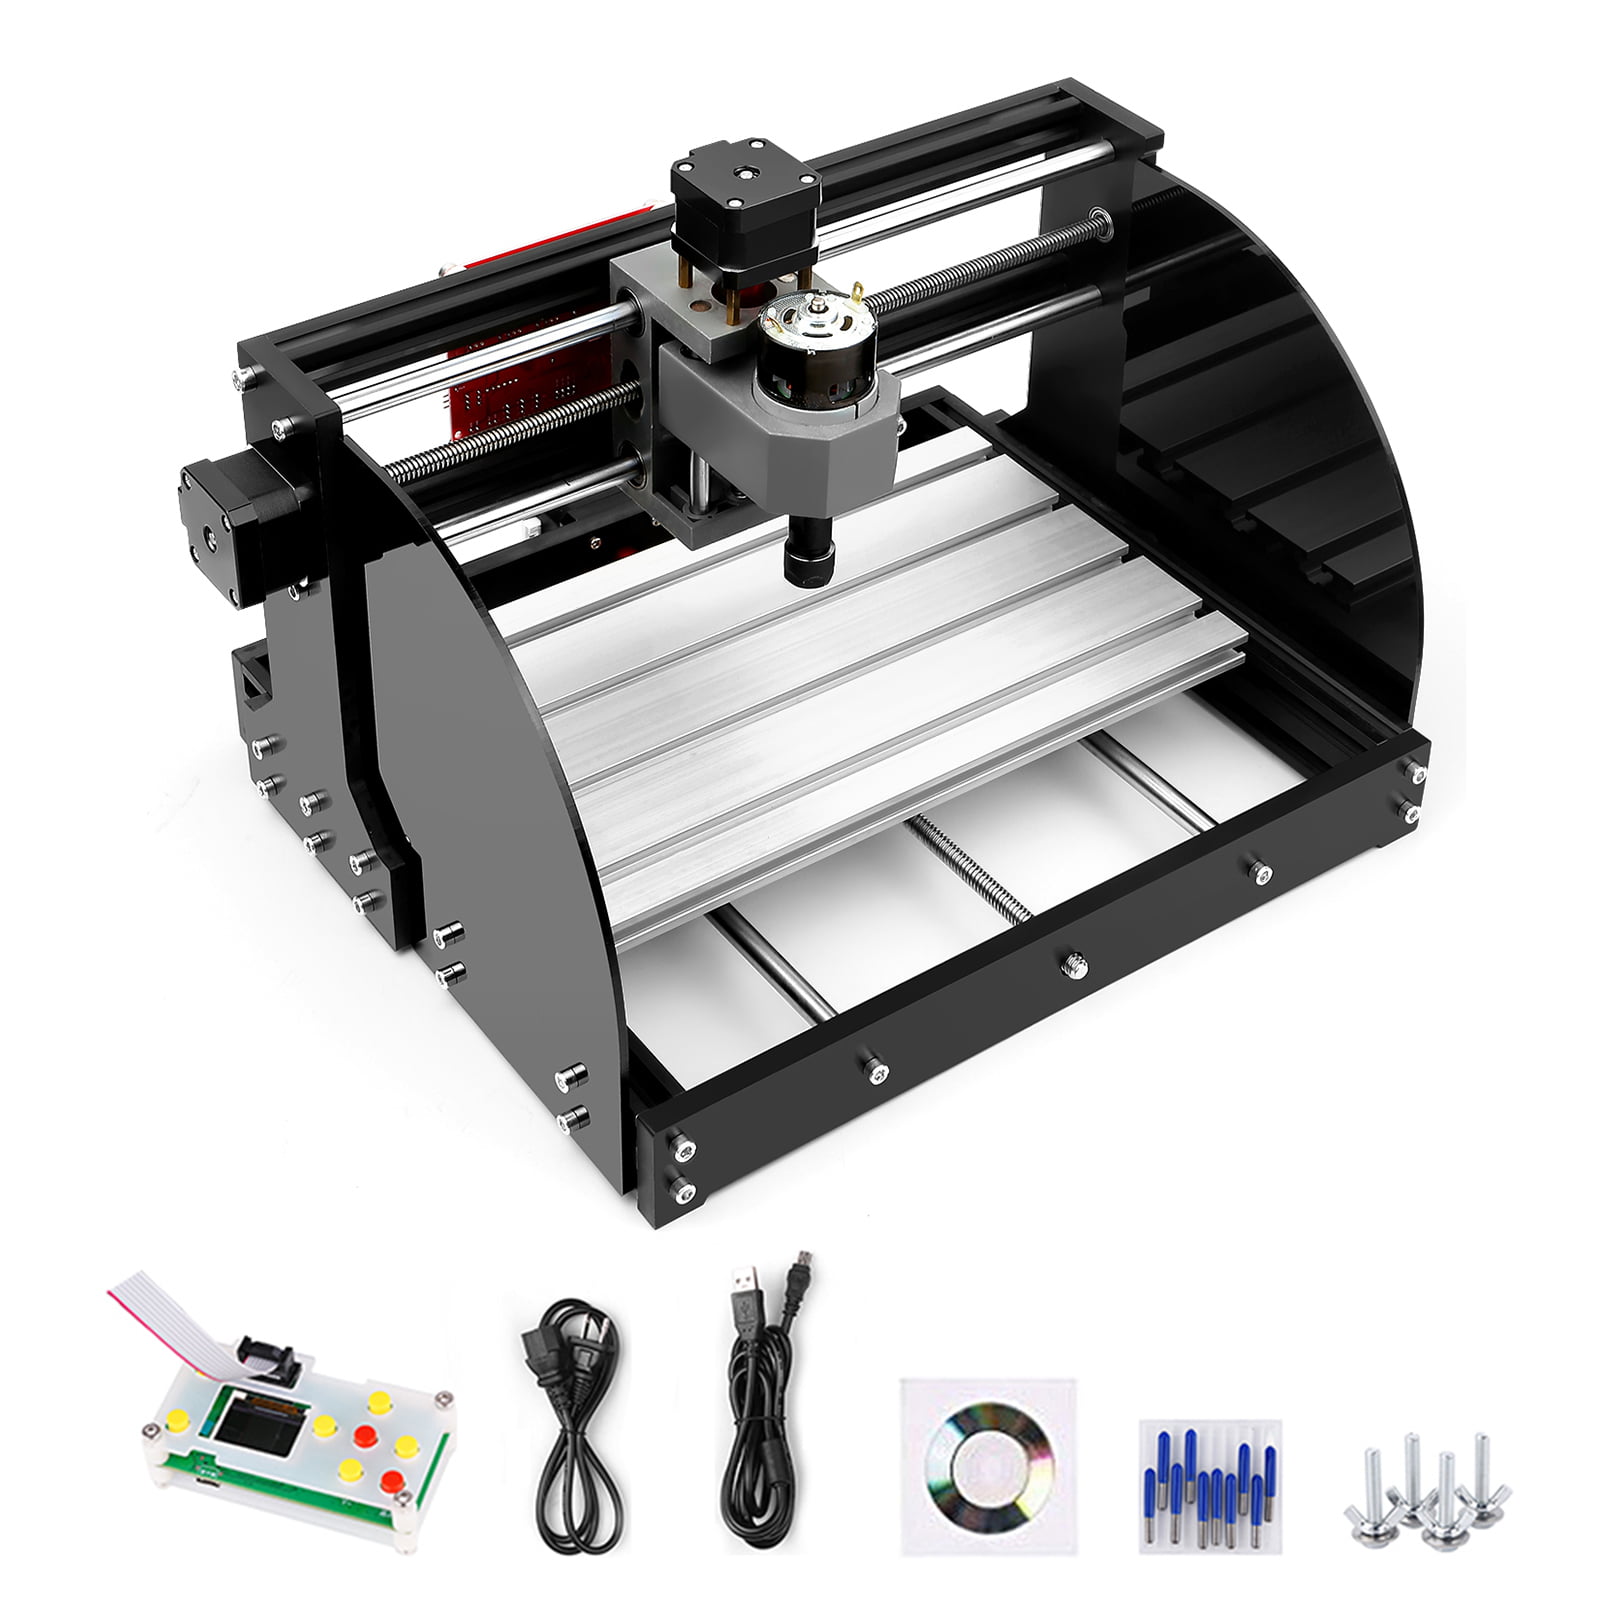 CNC 3018 Pro GRBL Control DIY Mini CNC Machine with ER11 and 5mm Extension Rod 3 Axis PCB Milling Machine Wood Router Engraver with Offline Controller